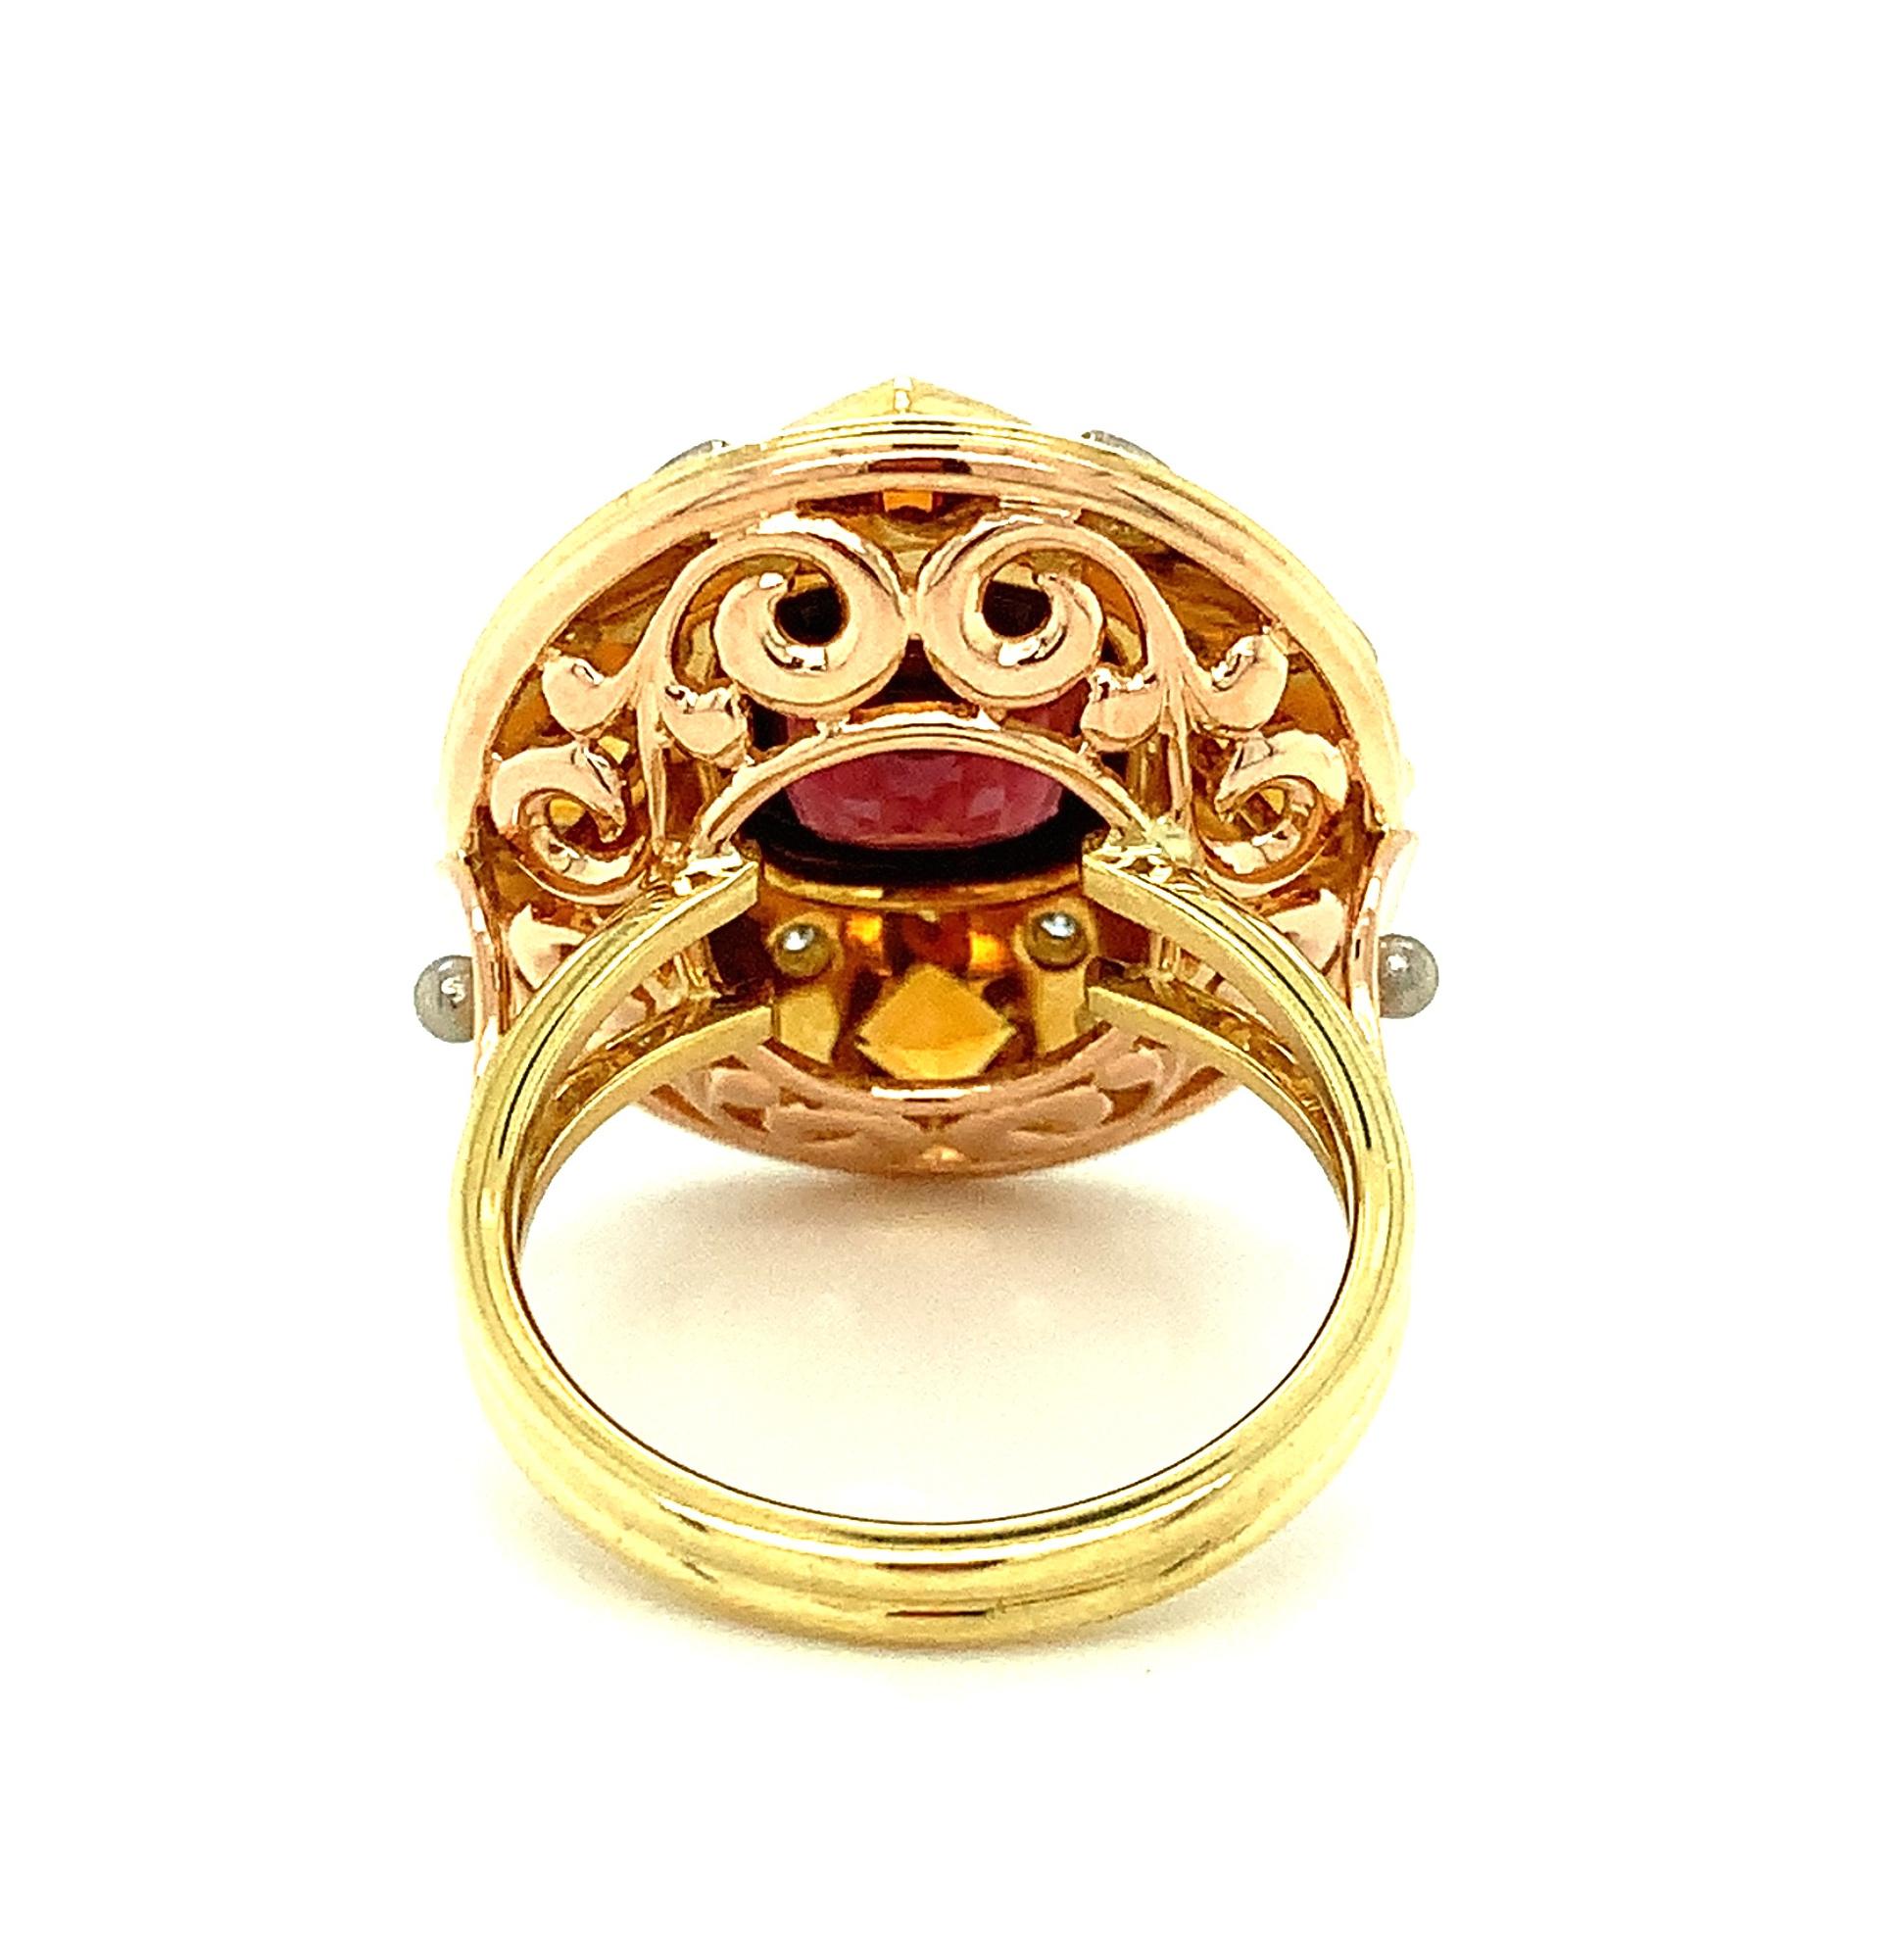 5.23 Carat Red Spinel, Citrine and Diamond Cocktail Ring in Tri-colored Gold For Sale 1